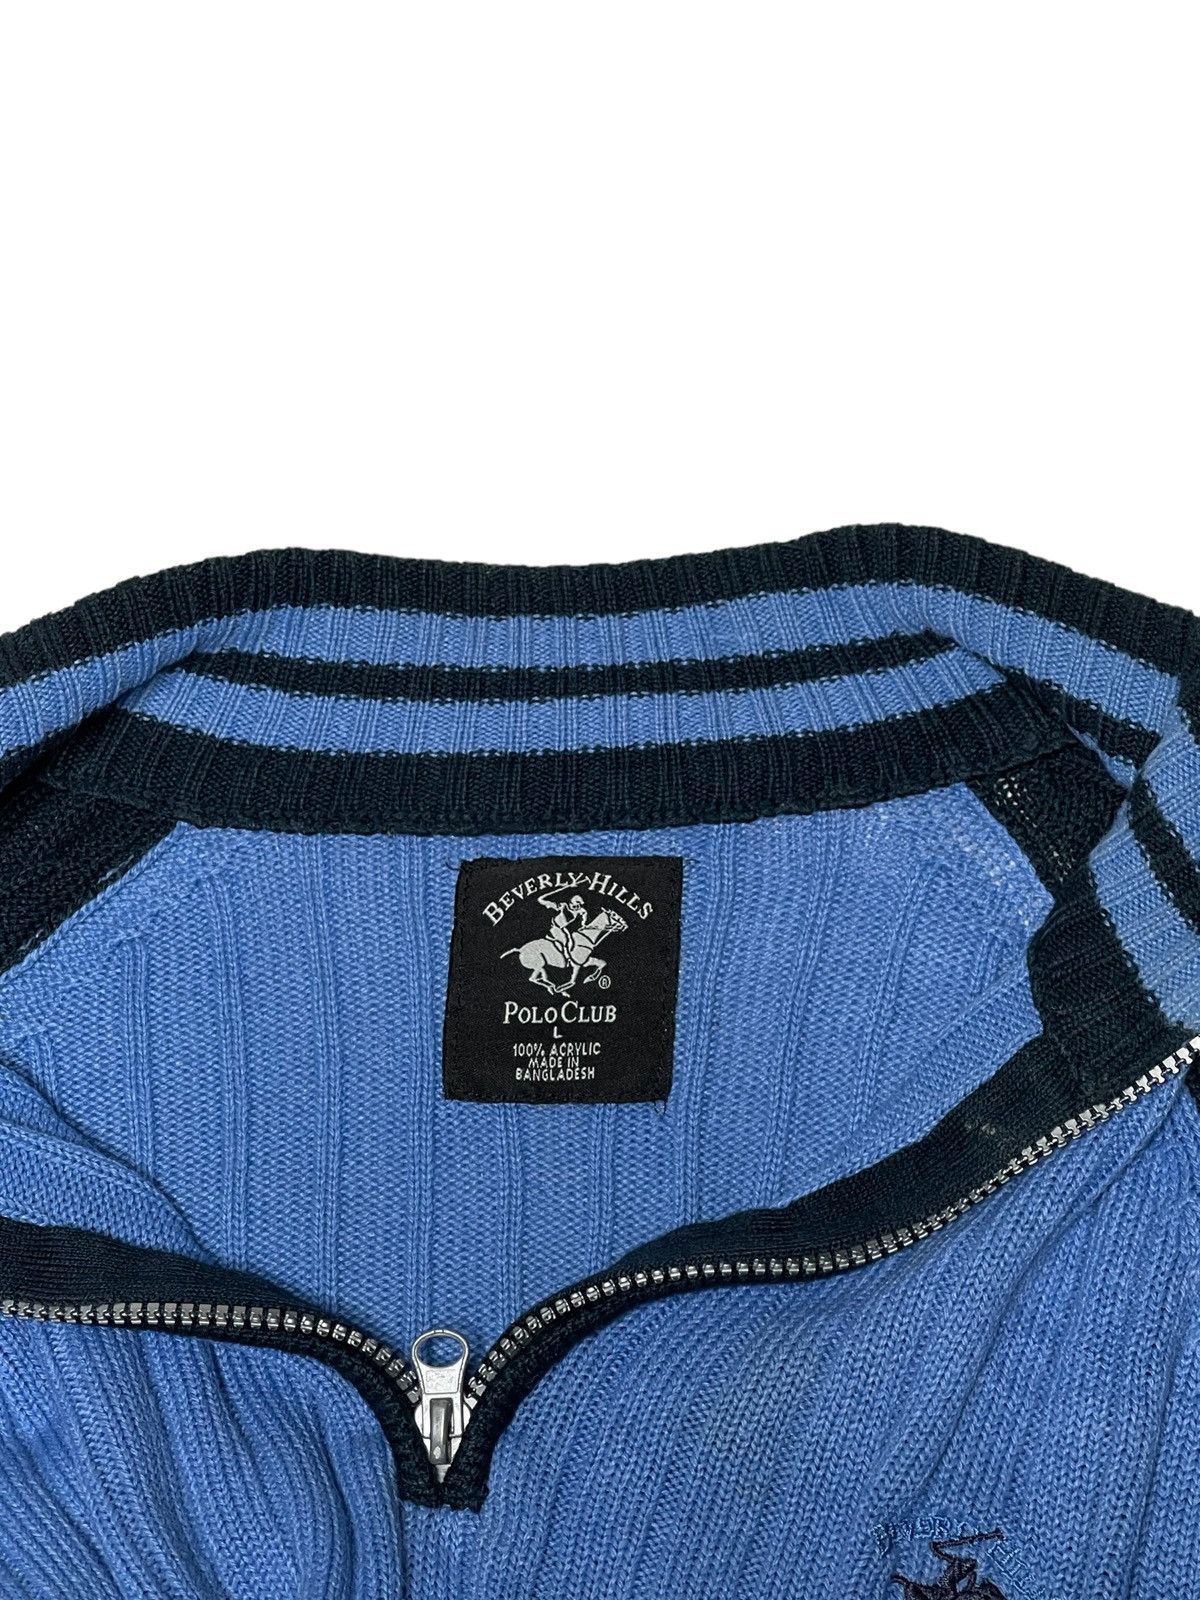 Vintage Beverly Hills Polo Club Zip-up Sweater Size US L / EU 52-54 / 3 - 3 Thumbnail